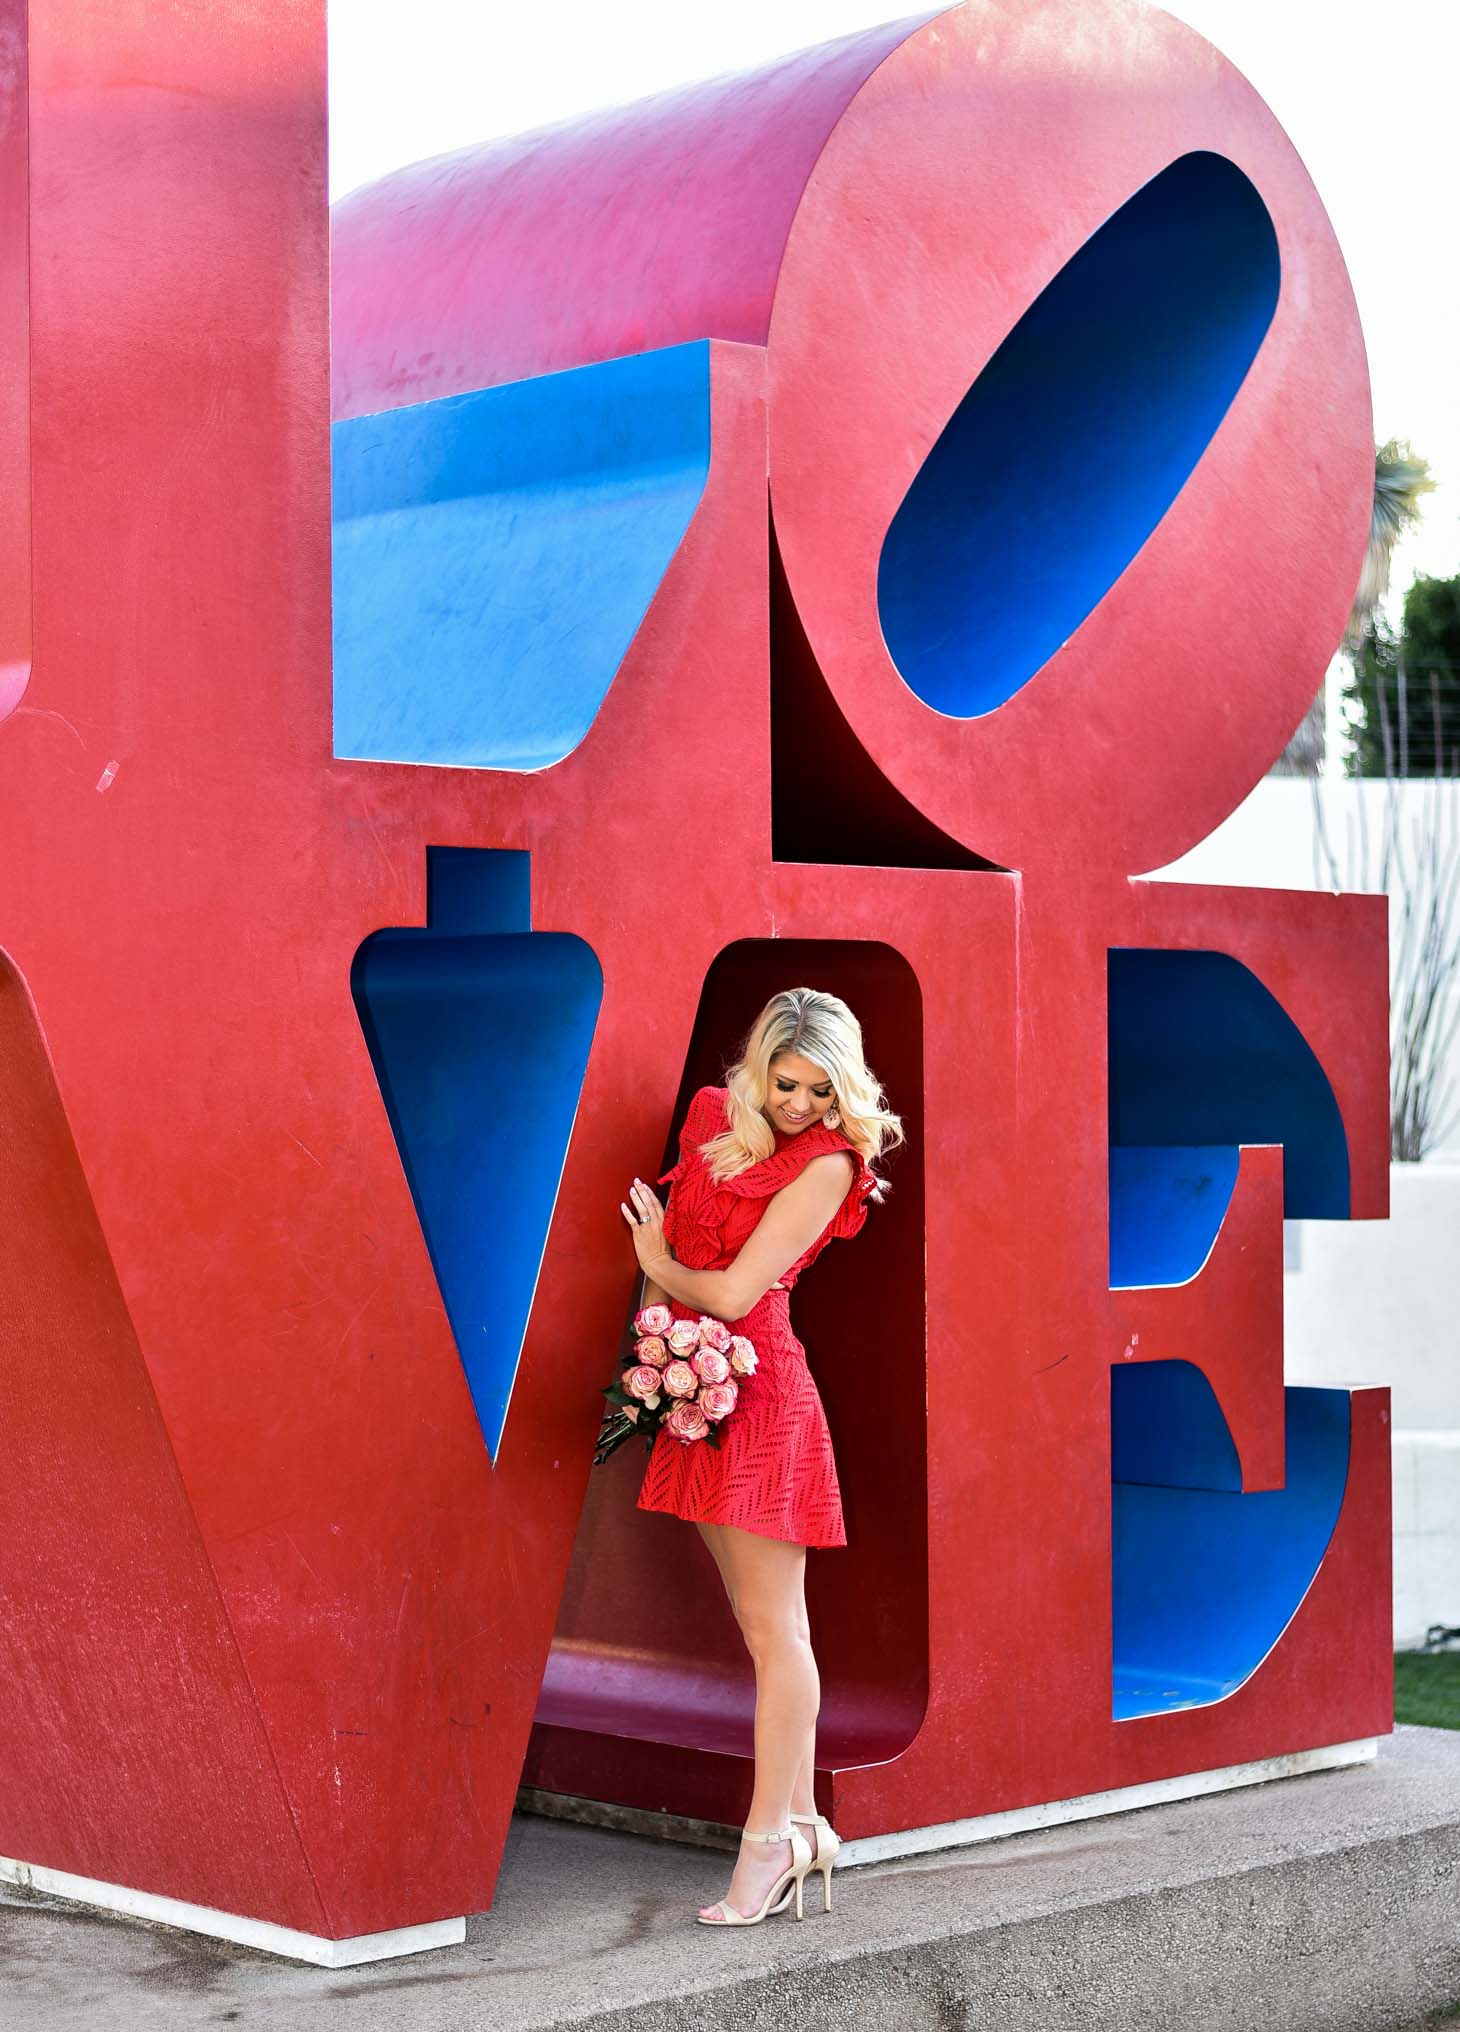 Erin Elizabeth of Wink and a Twirl in Red Dress For Valentine's Day